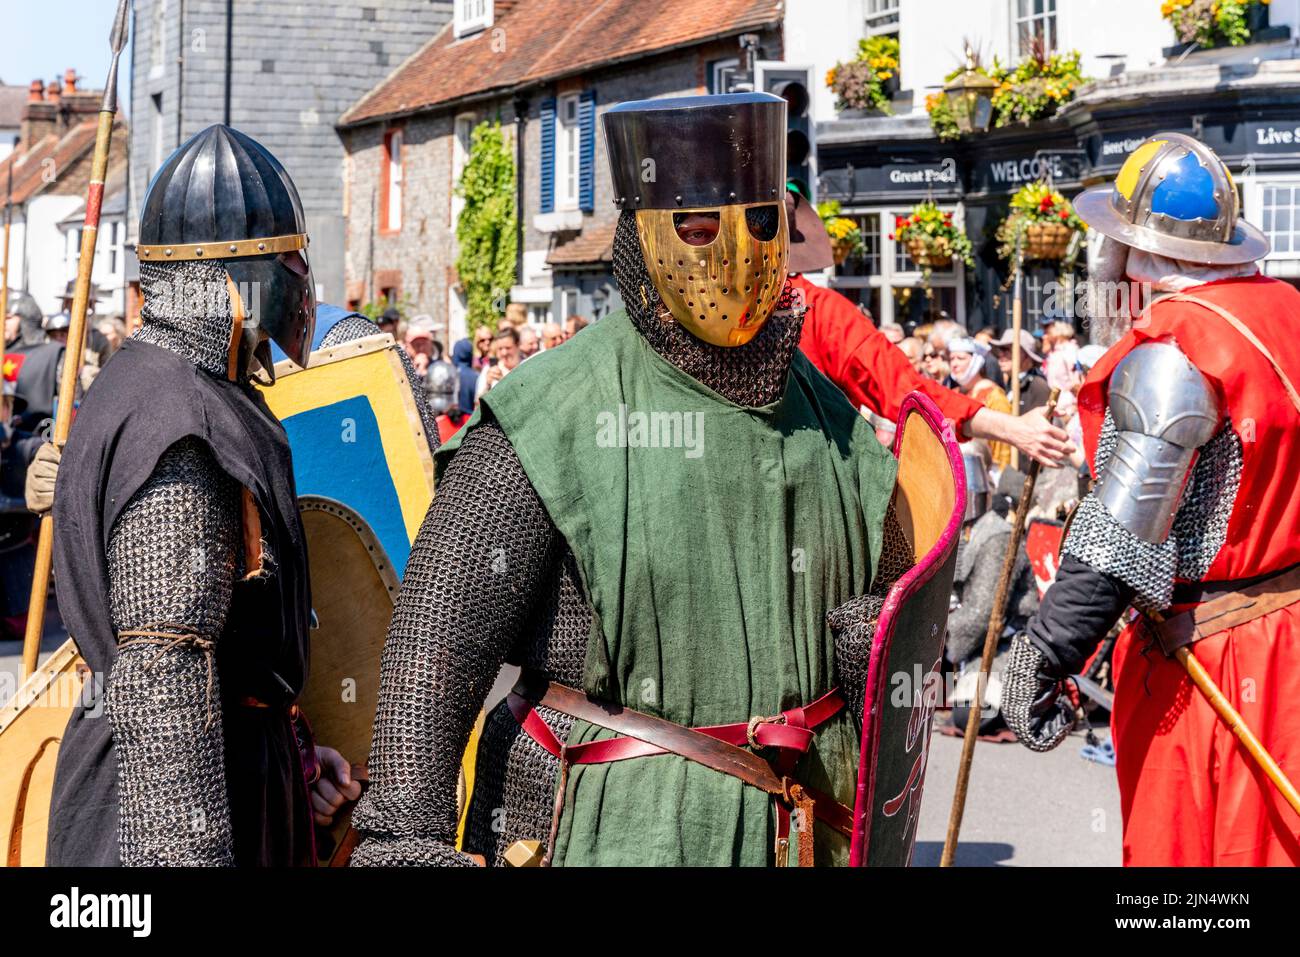 Men Dressed In Medieval Costume Prepare To Take Part In A Re-Enactment Of The Battle Of Lewes , Lewes, East Sussex, UK. Stock Photo